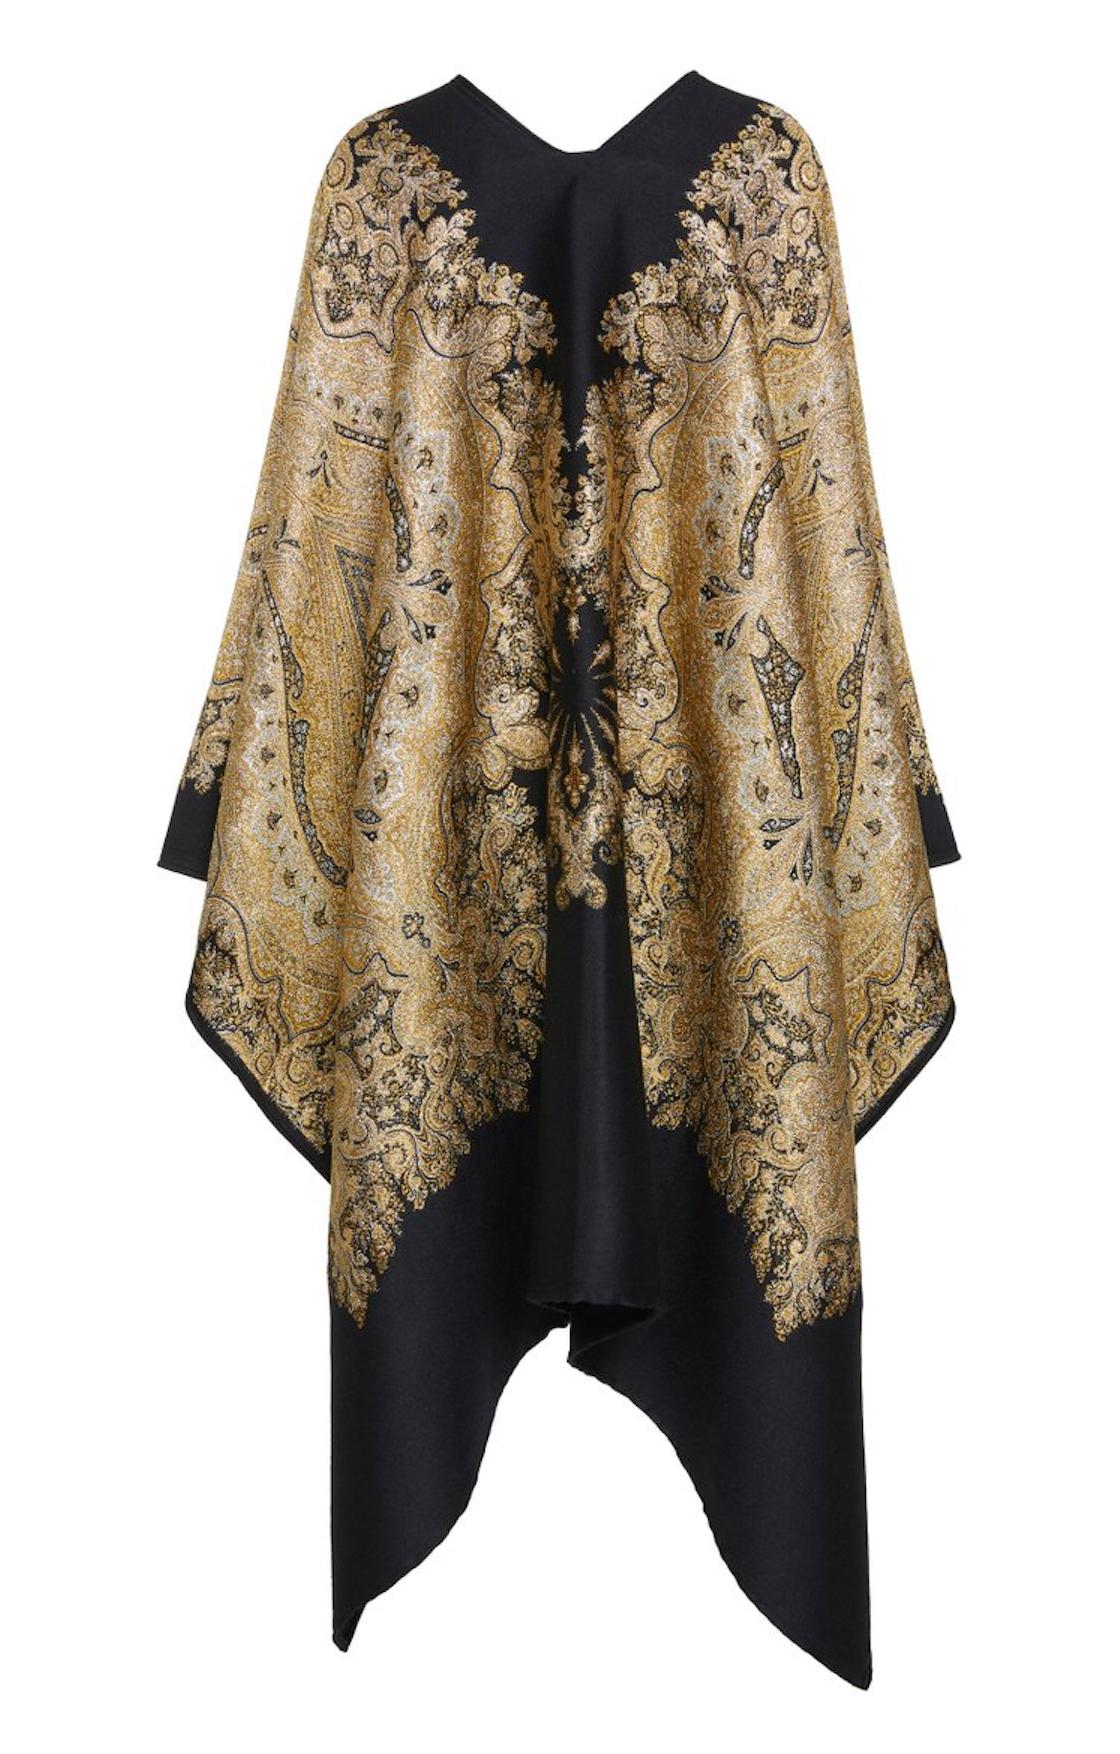 This Etro Fall 2019 Runway open-front cape / poncho features an oversized silhouette and a metallic black and gold jacquard tapestry of beautifully intricate embroidery. Pair this with an all-black outfit for an elegant look or try with denim to